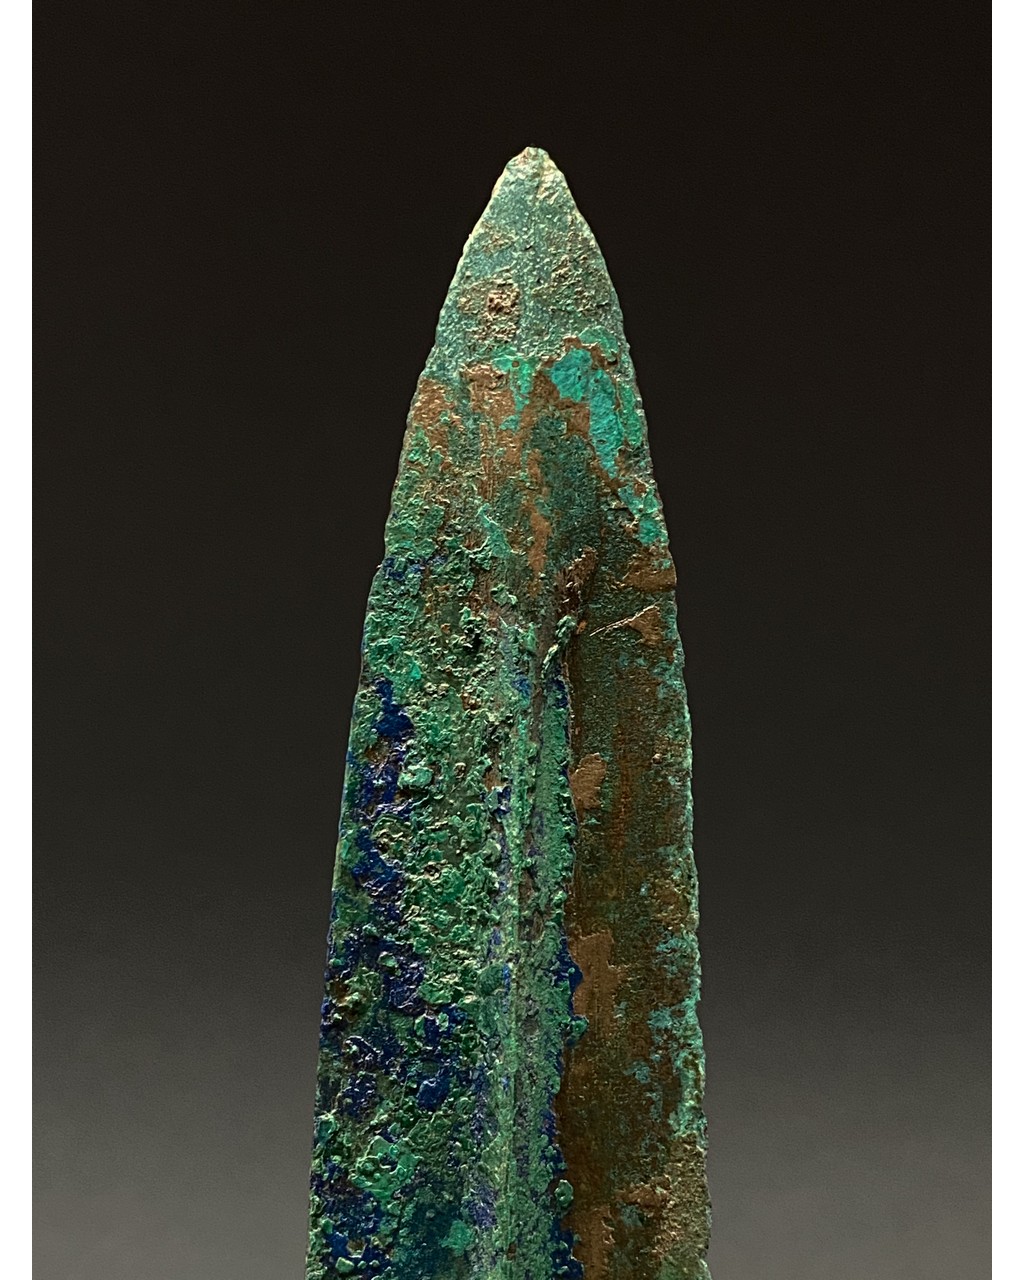 ANCIENT BRONZE SPEAR ON STAND - Image 2 of 4